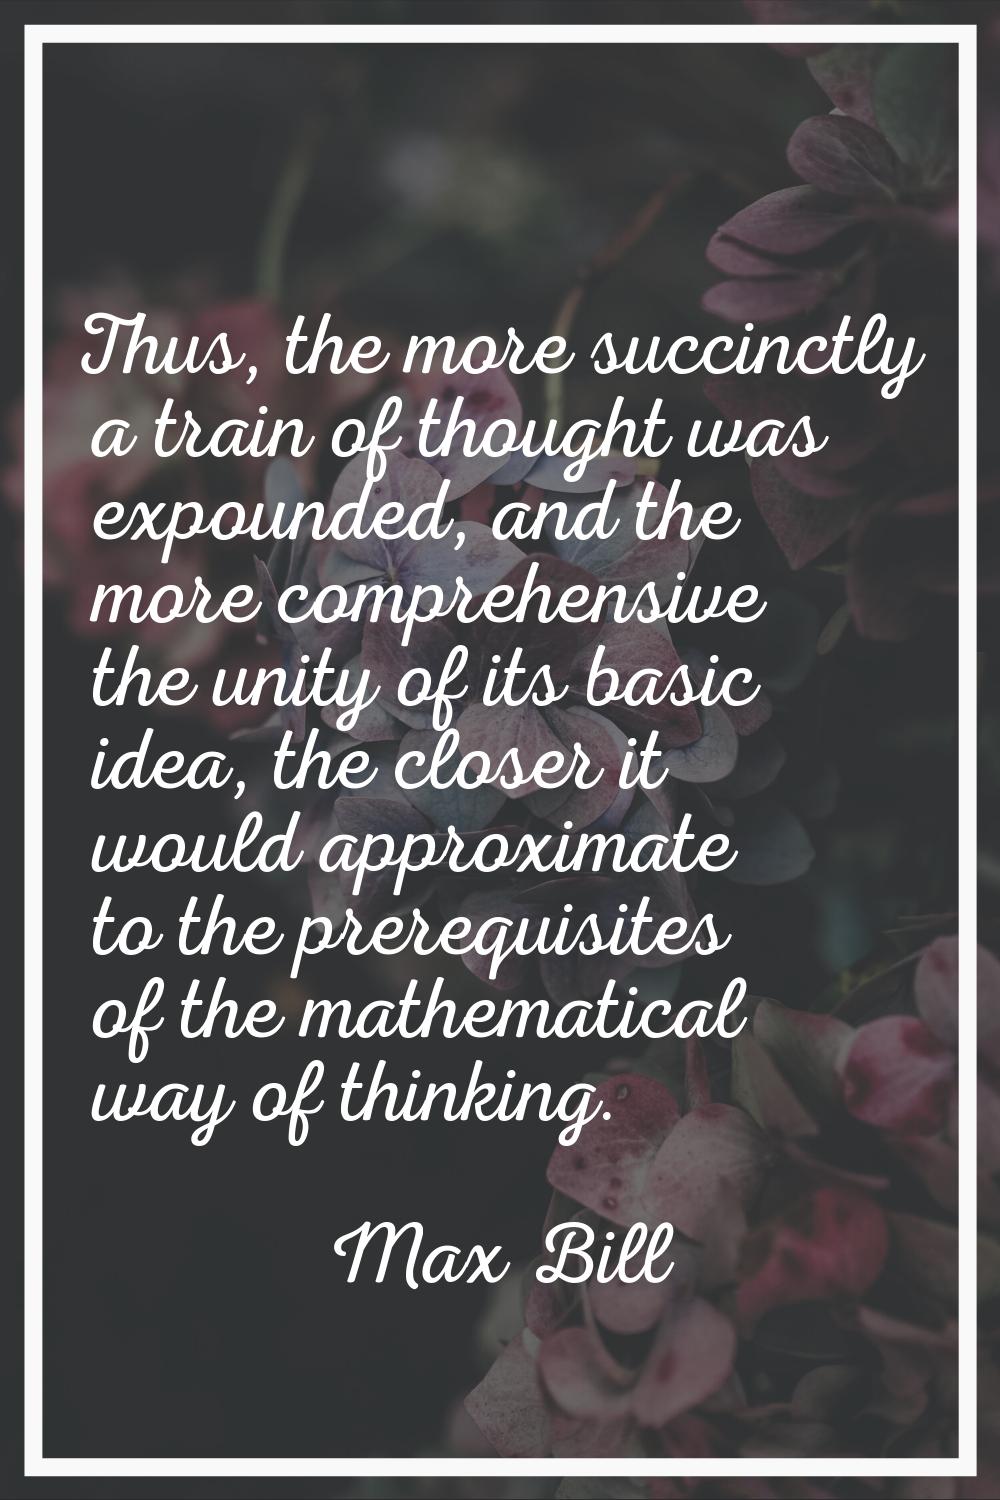 Thus, the more succinctly a train of thought was expounded, and the more comprehensive the unity of